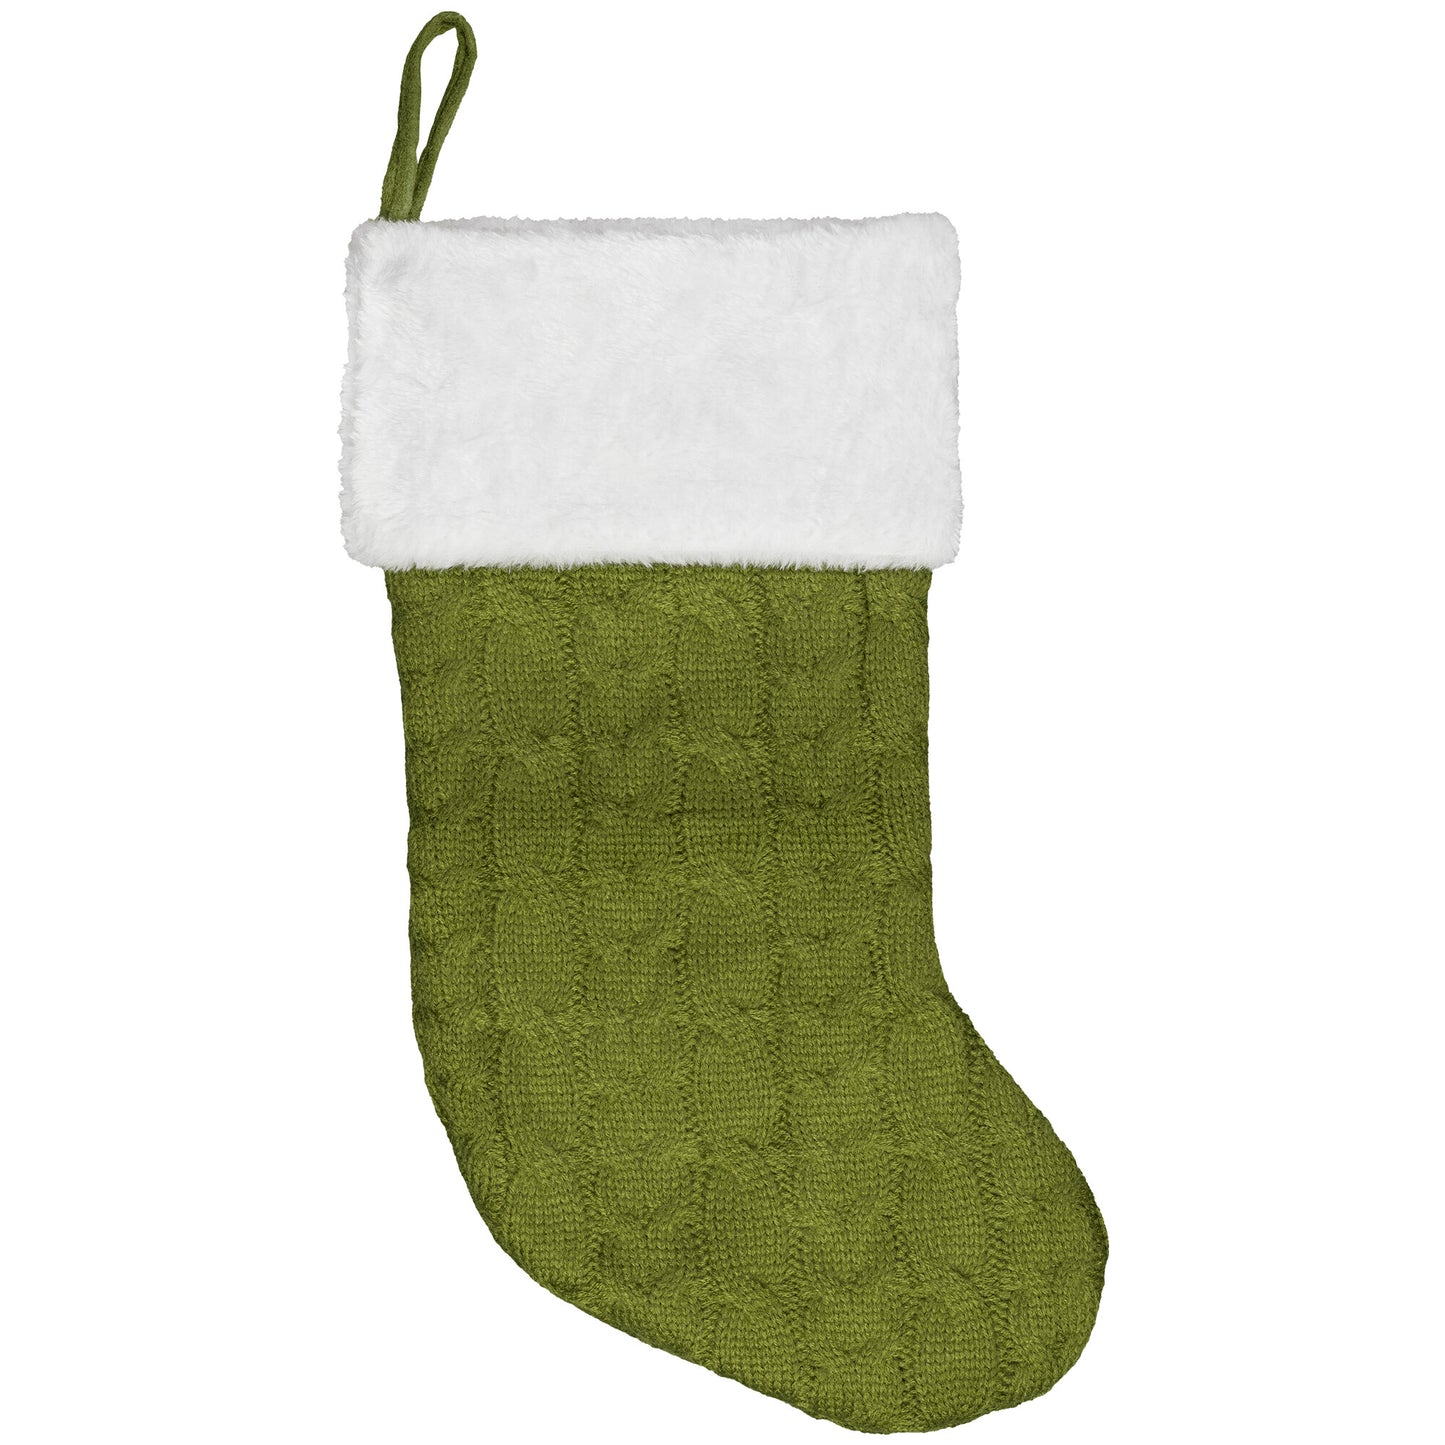 Personalized Embroidered Christmas Stockings - Broken Knuckle Apparel